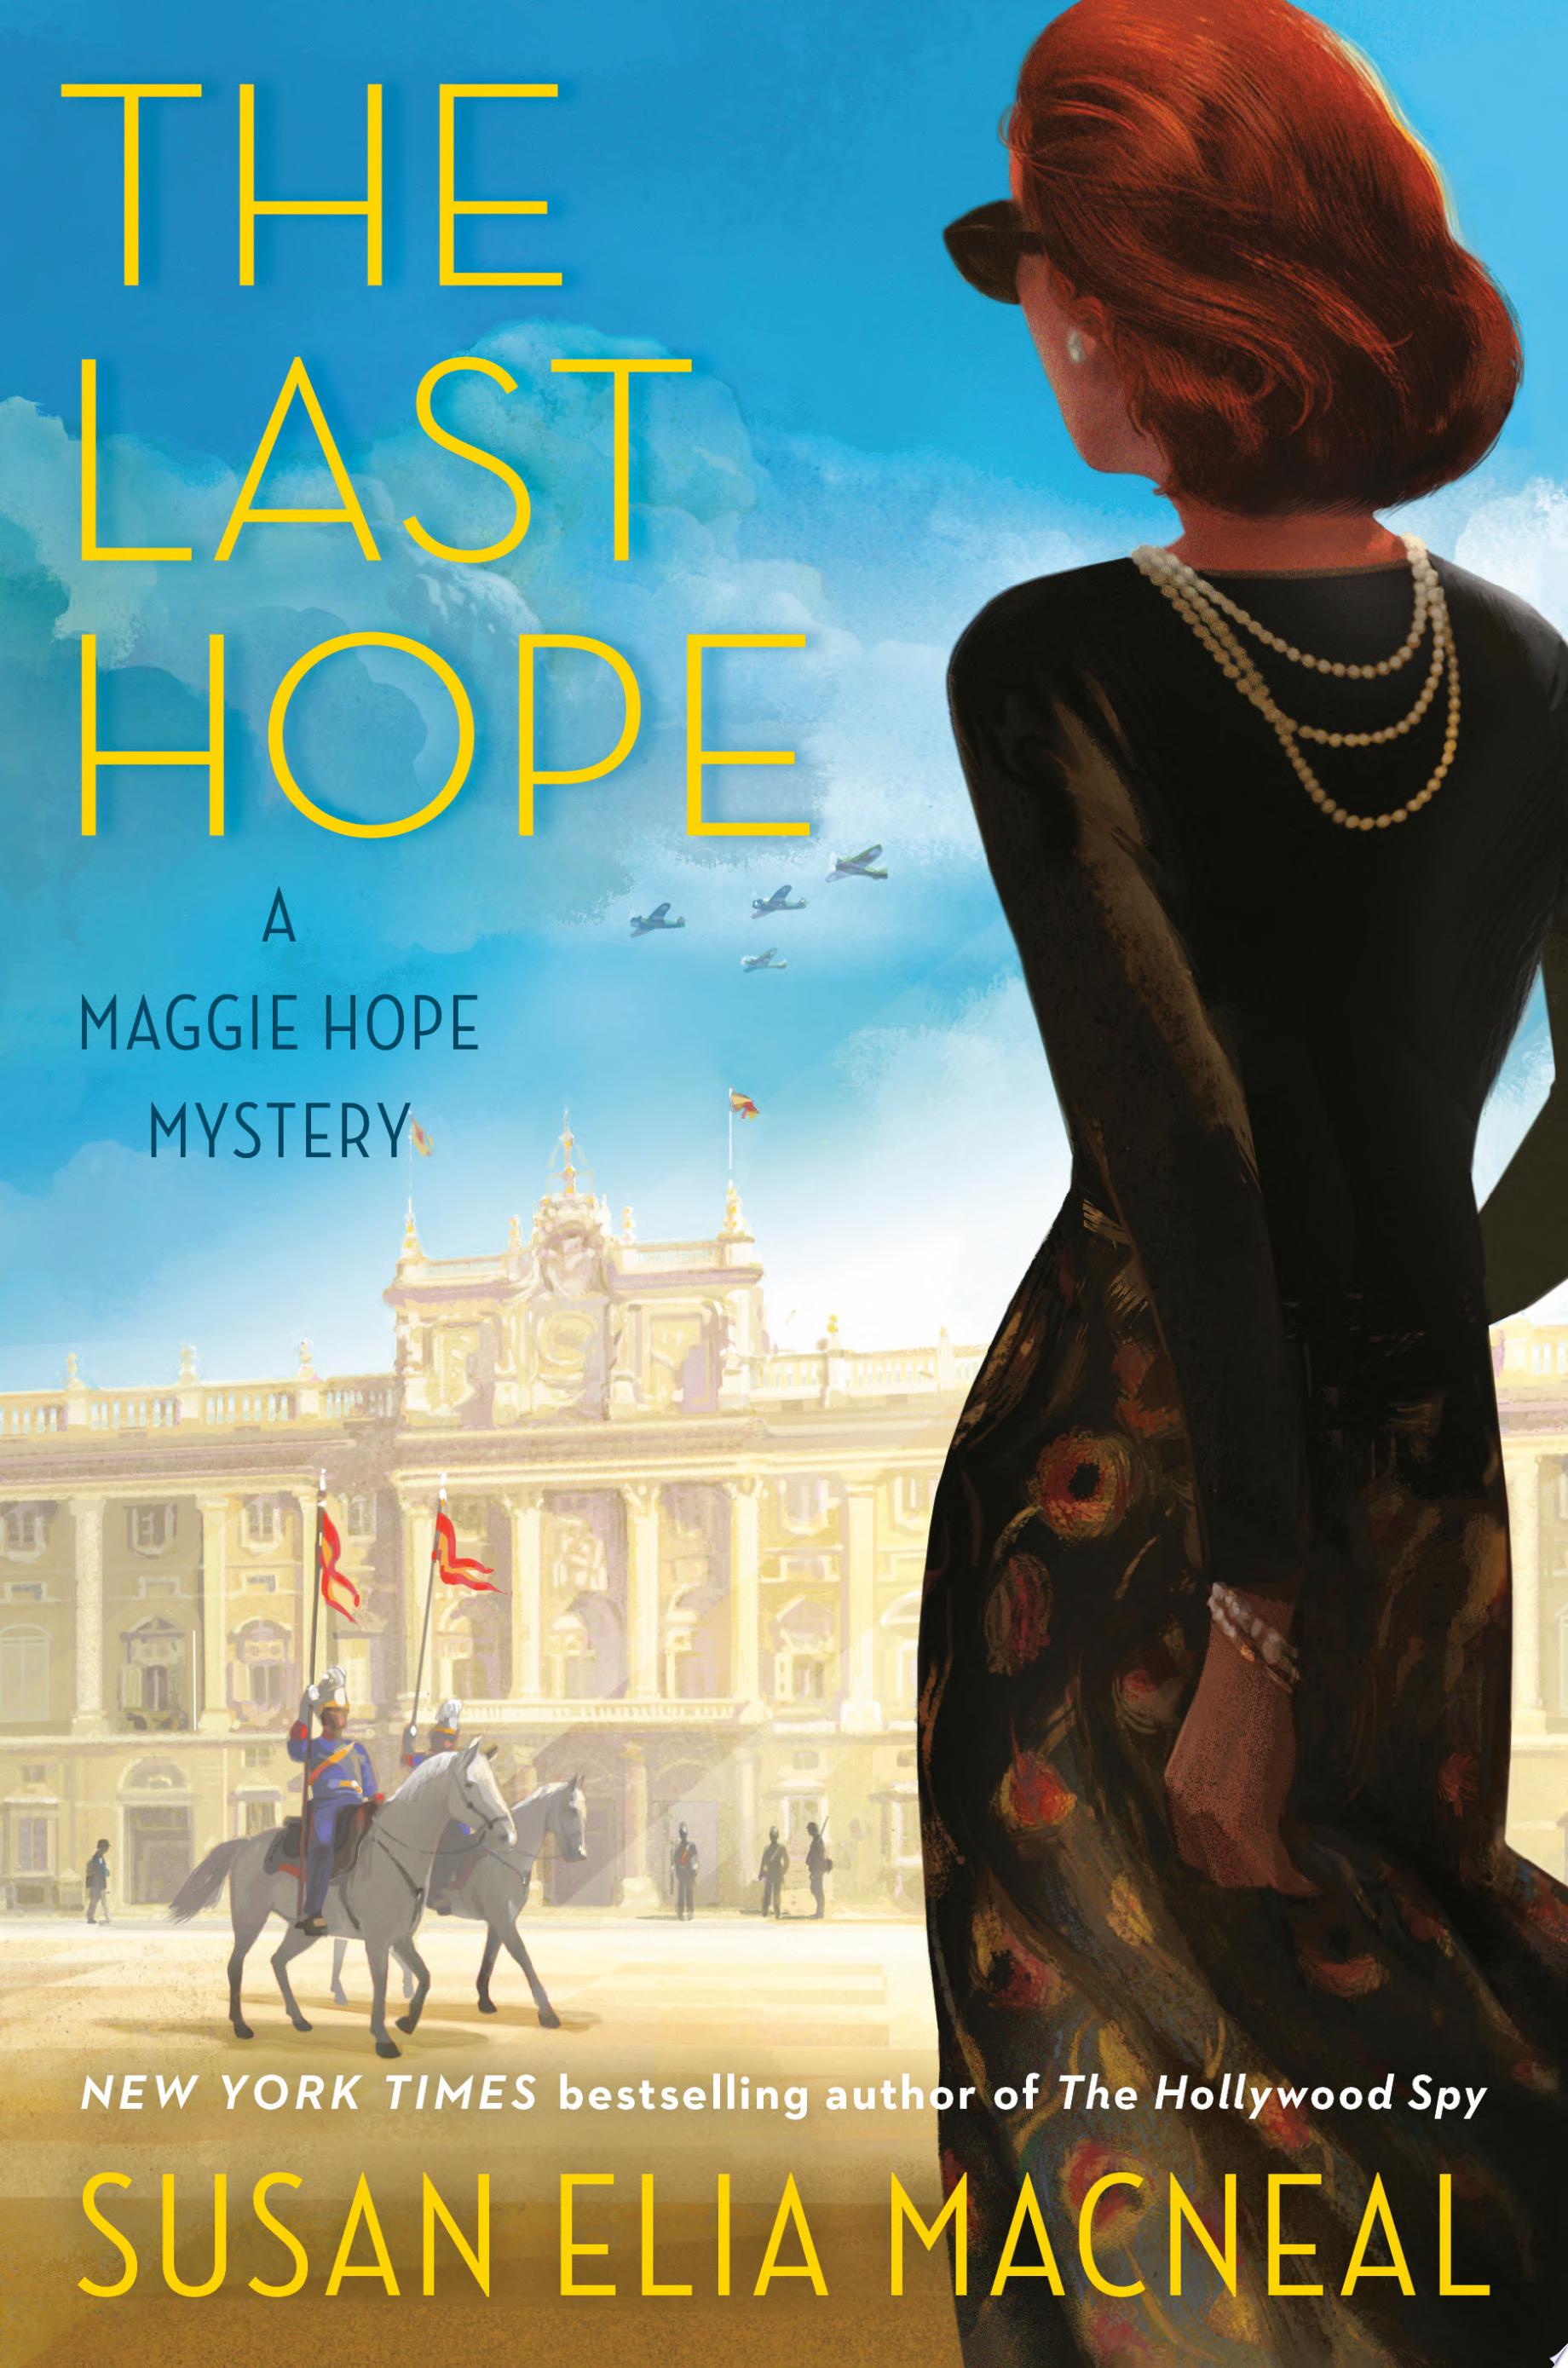 Image for "The Last Hope"